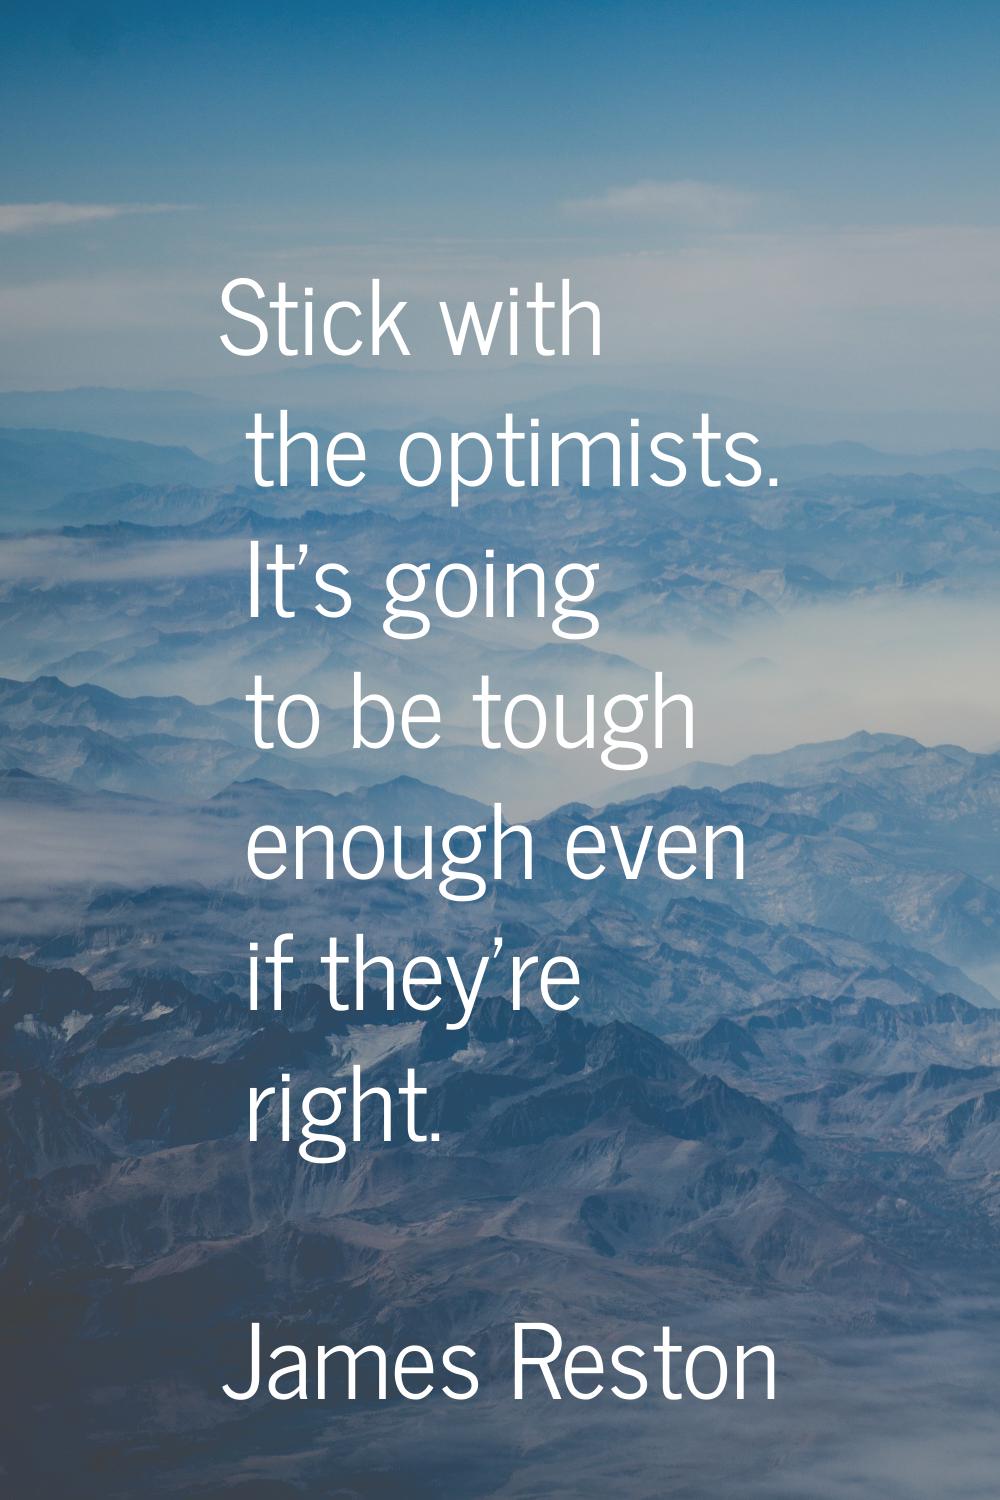 Stick with the optimists. It's going to be tough enough even if they're right.